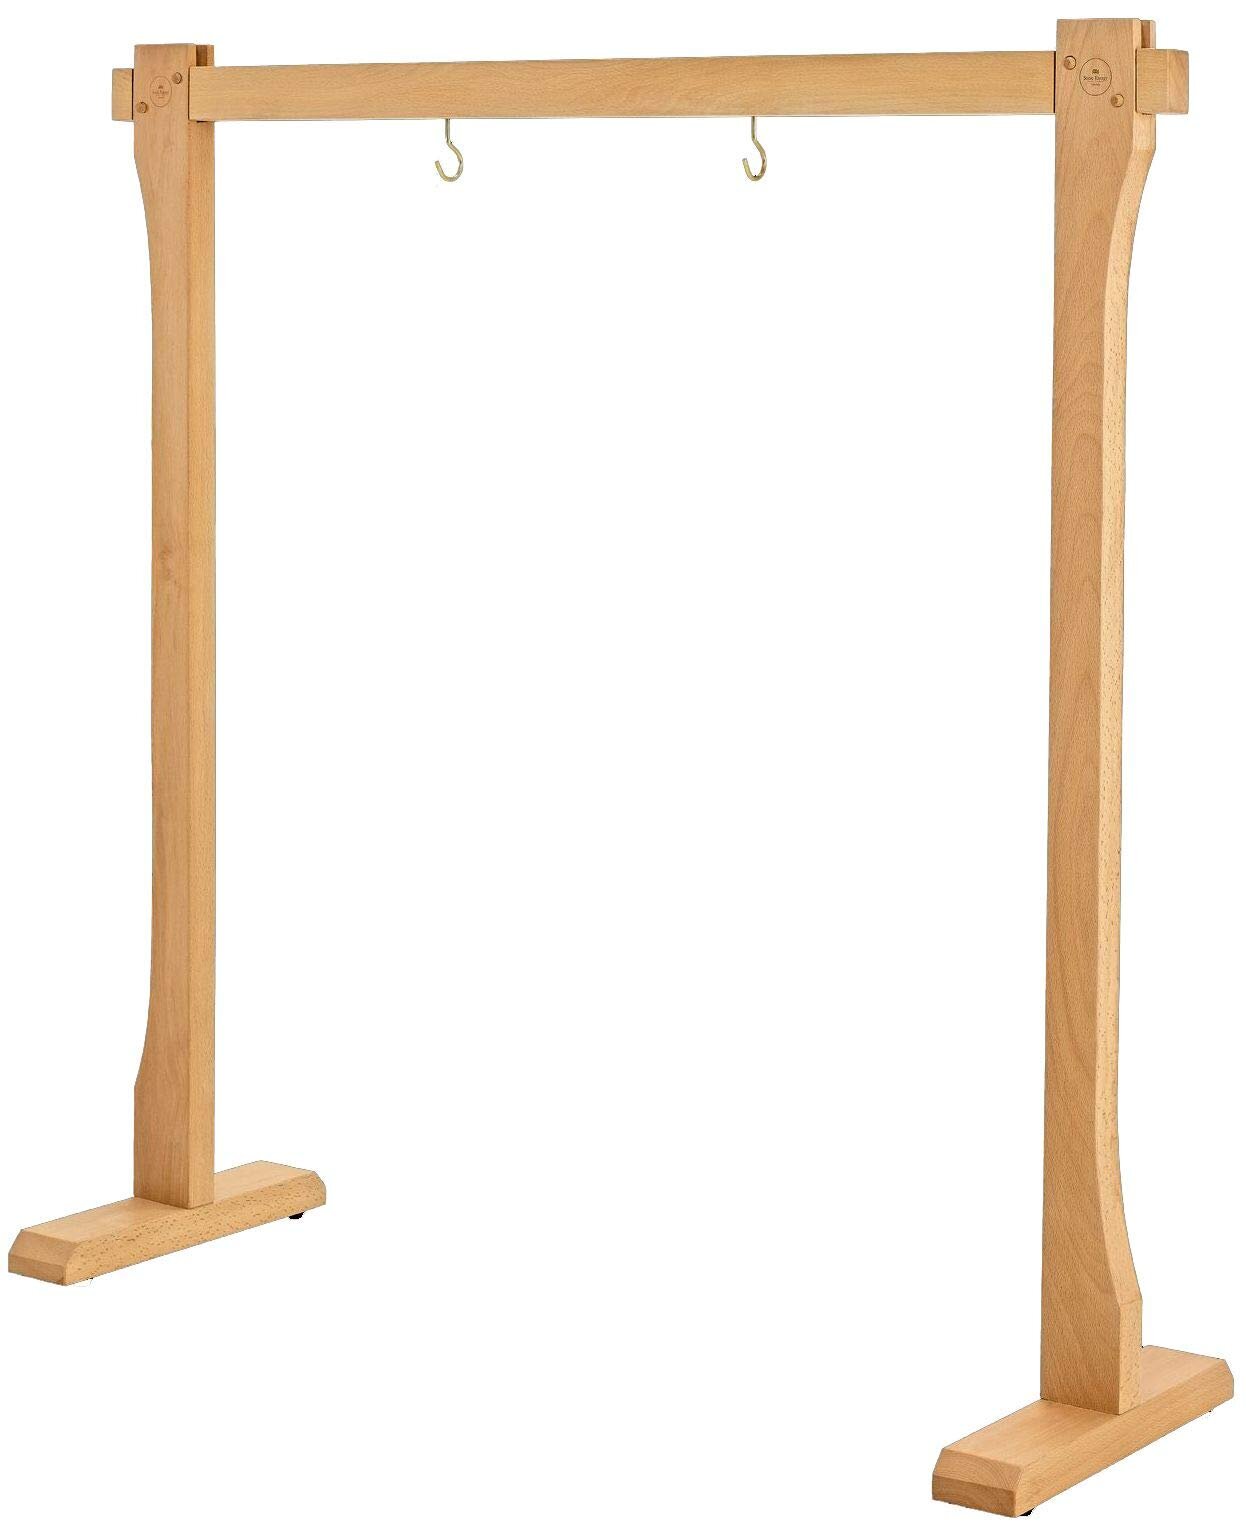 Meinl Gong Stands Wood Gong Stand - Large; Up to 40